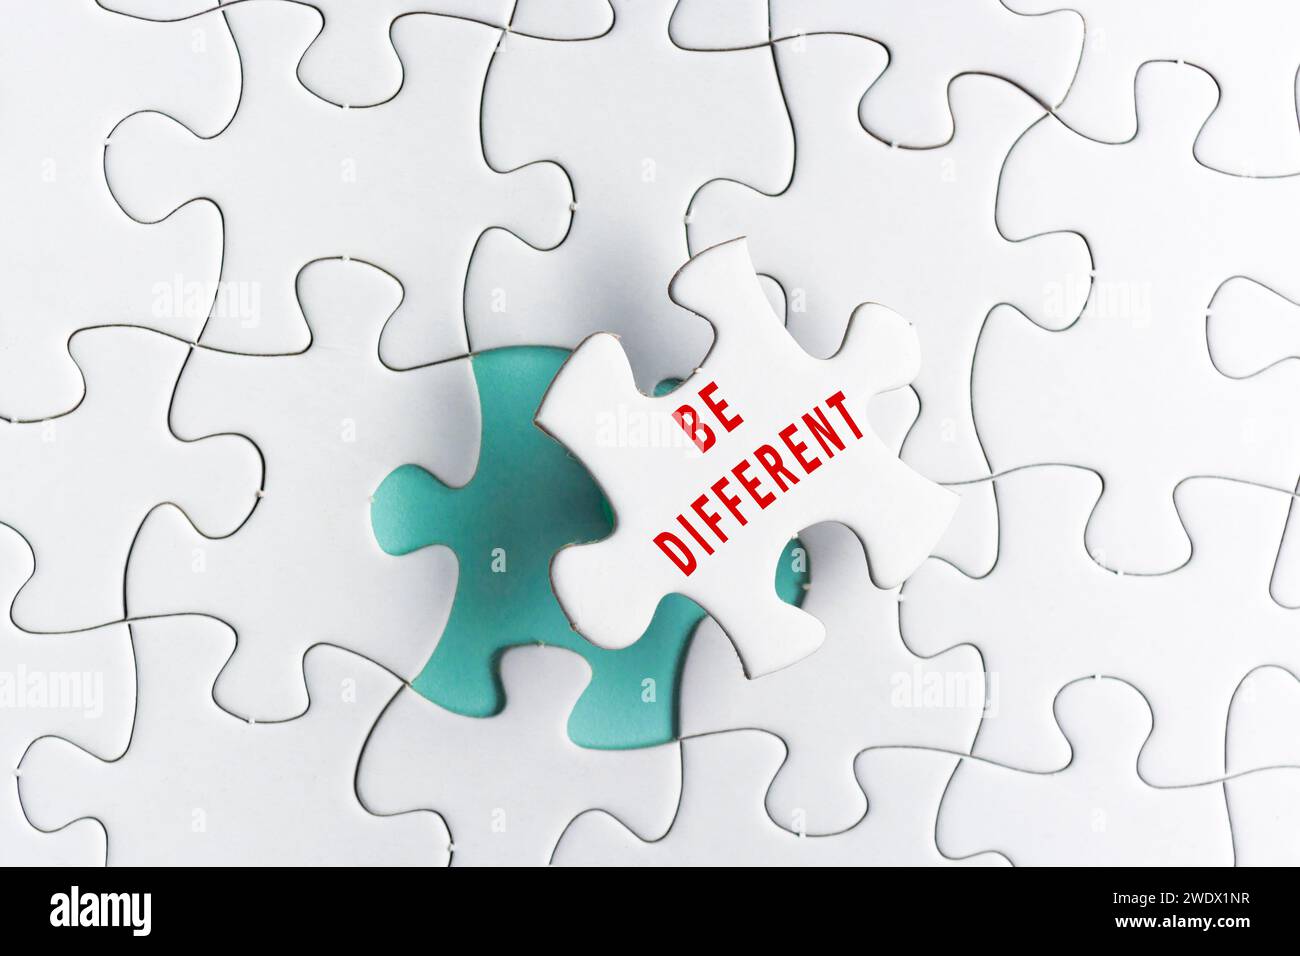 Be different text on white Jigsaw Puzzle over green background. Stock Photo